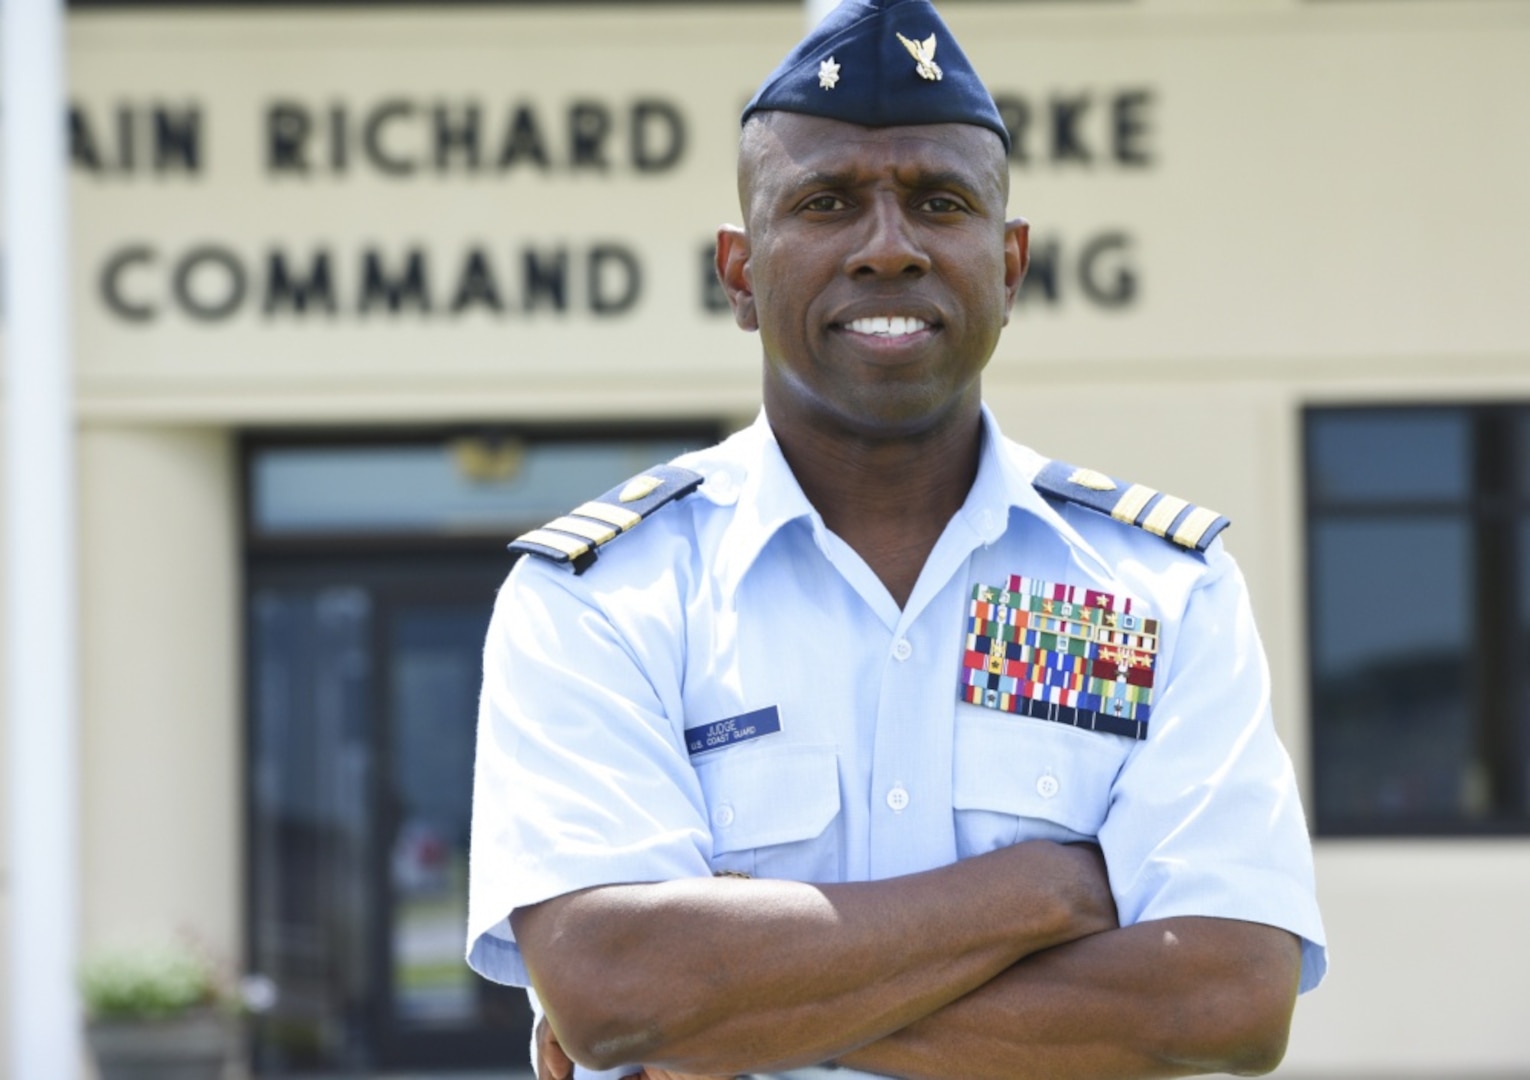 Coast Guard Cmdr. Warren Judge, executive officer of Base Elizabeth City, North Carolina, poses for a photograph outside the command building on base, Aug. 10, 2017. Judge was selected as the 2017 Blacks in Government Meritorious Service Award recipient for his volunteer work with local youth organizations and his role in solidifying a memorandum of agreement between the base and Elizabeth City State University. (U.S. Coast Guard photo by Petty Officer 3rd Class Corinne Zilnicki/Released)